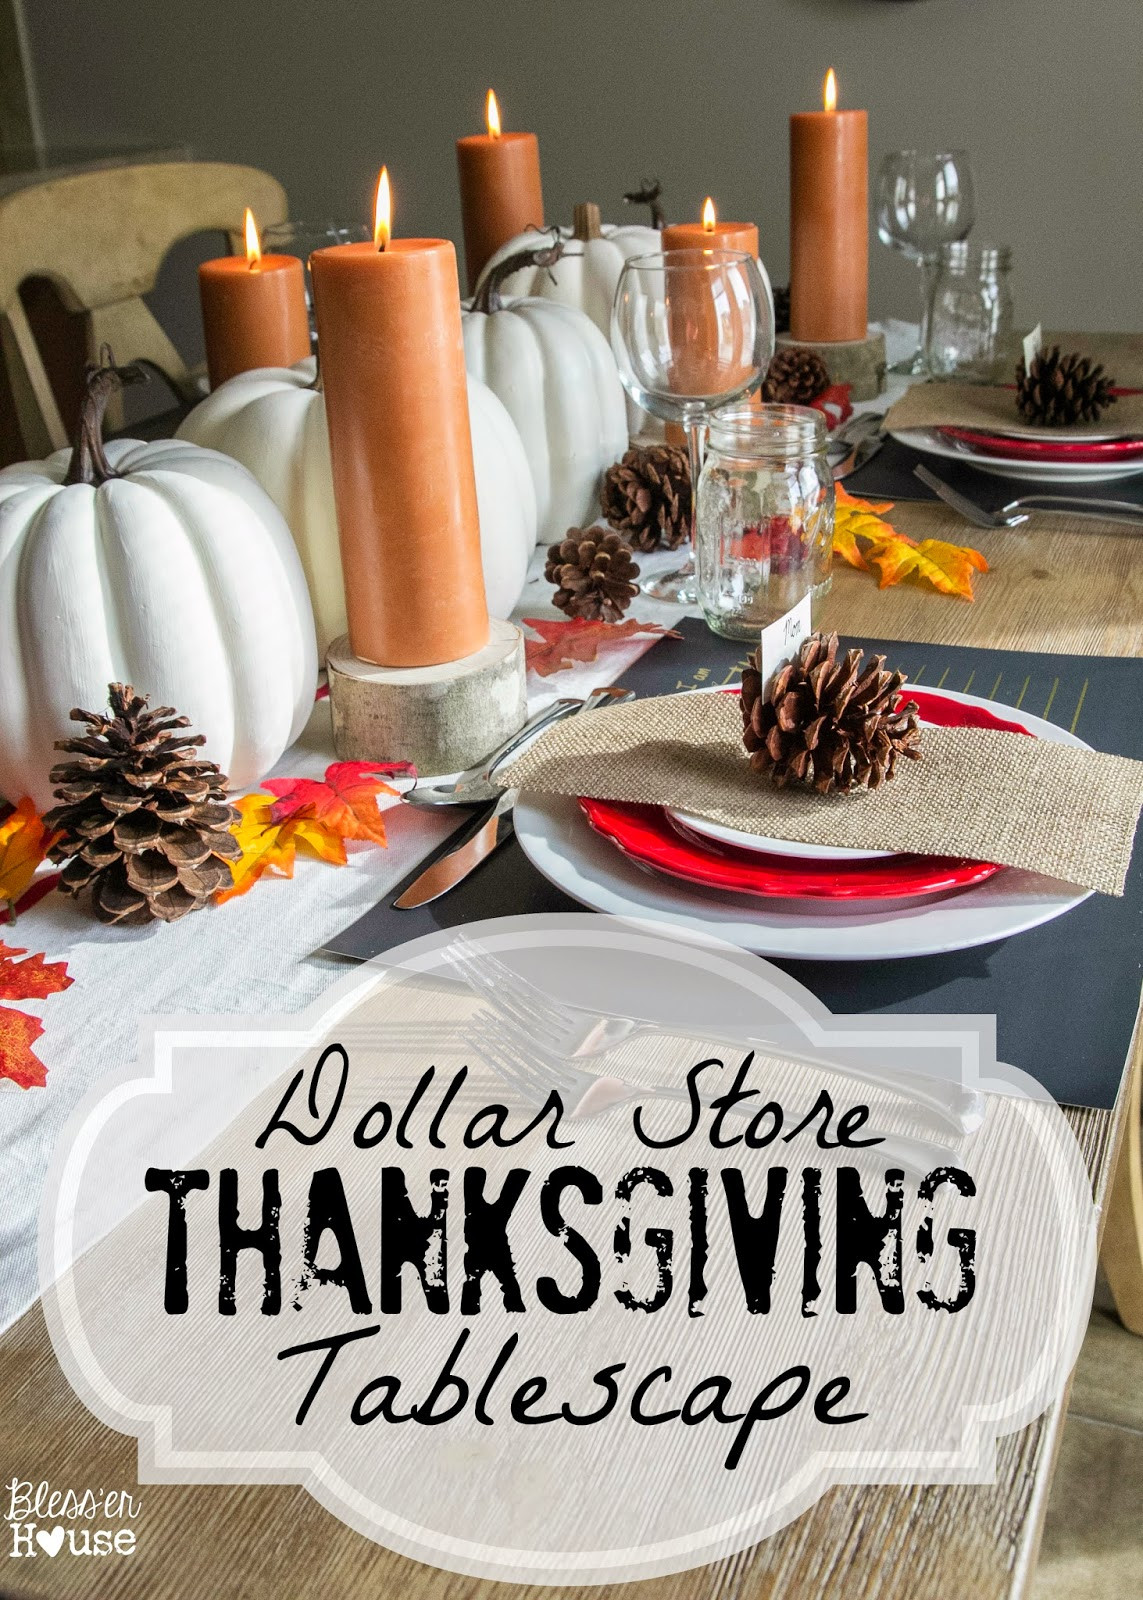 Inexpensive Thanksgiving Table Decorations
 30 DIY and Dollar Store Thanksgiving Table Decorations